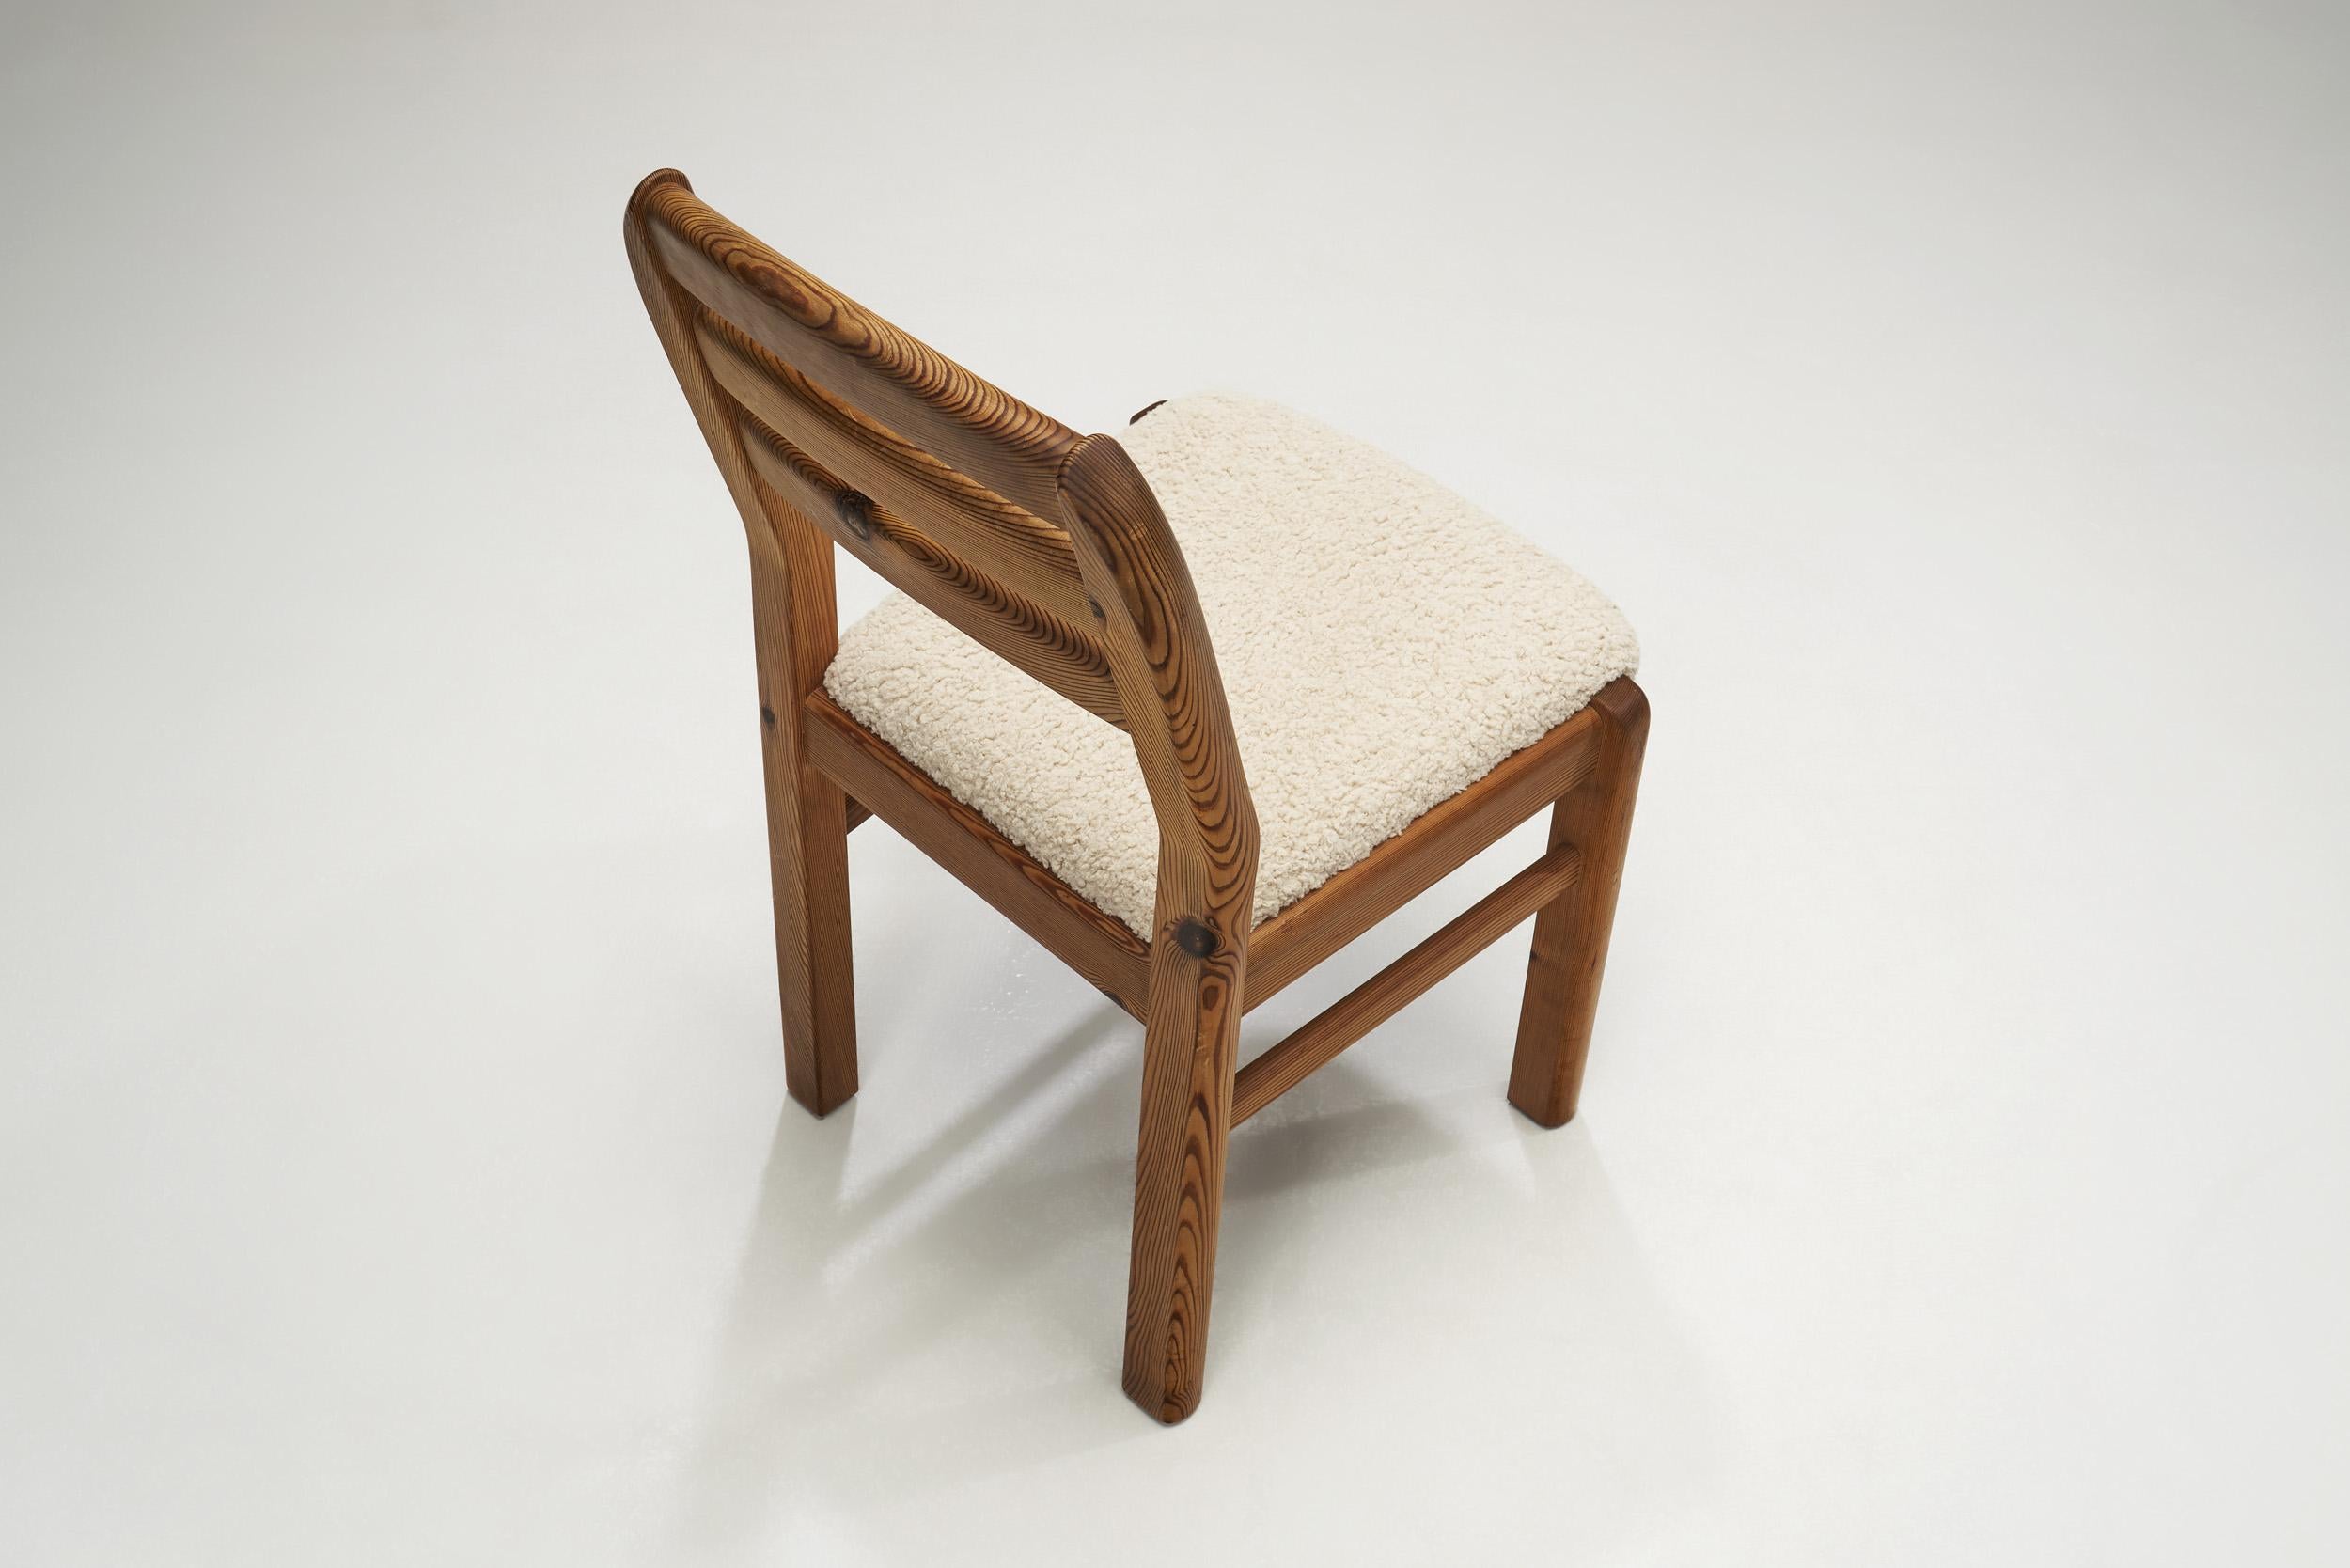 Sheepskin Scandinavian Pine Dining Chairs with Upholstered Seats, Scandinavia 1990s For Sale